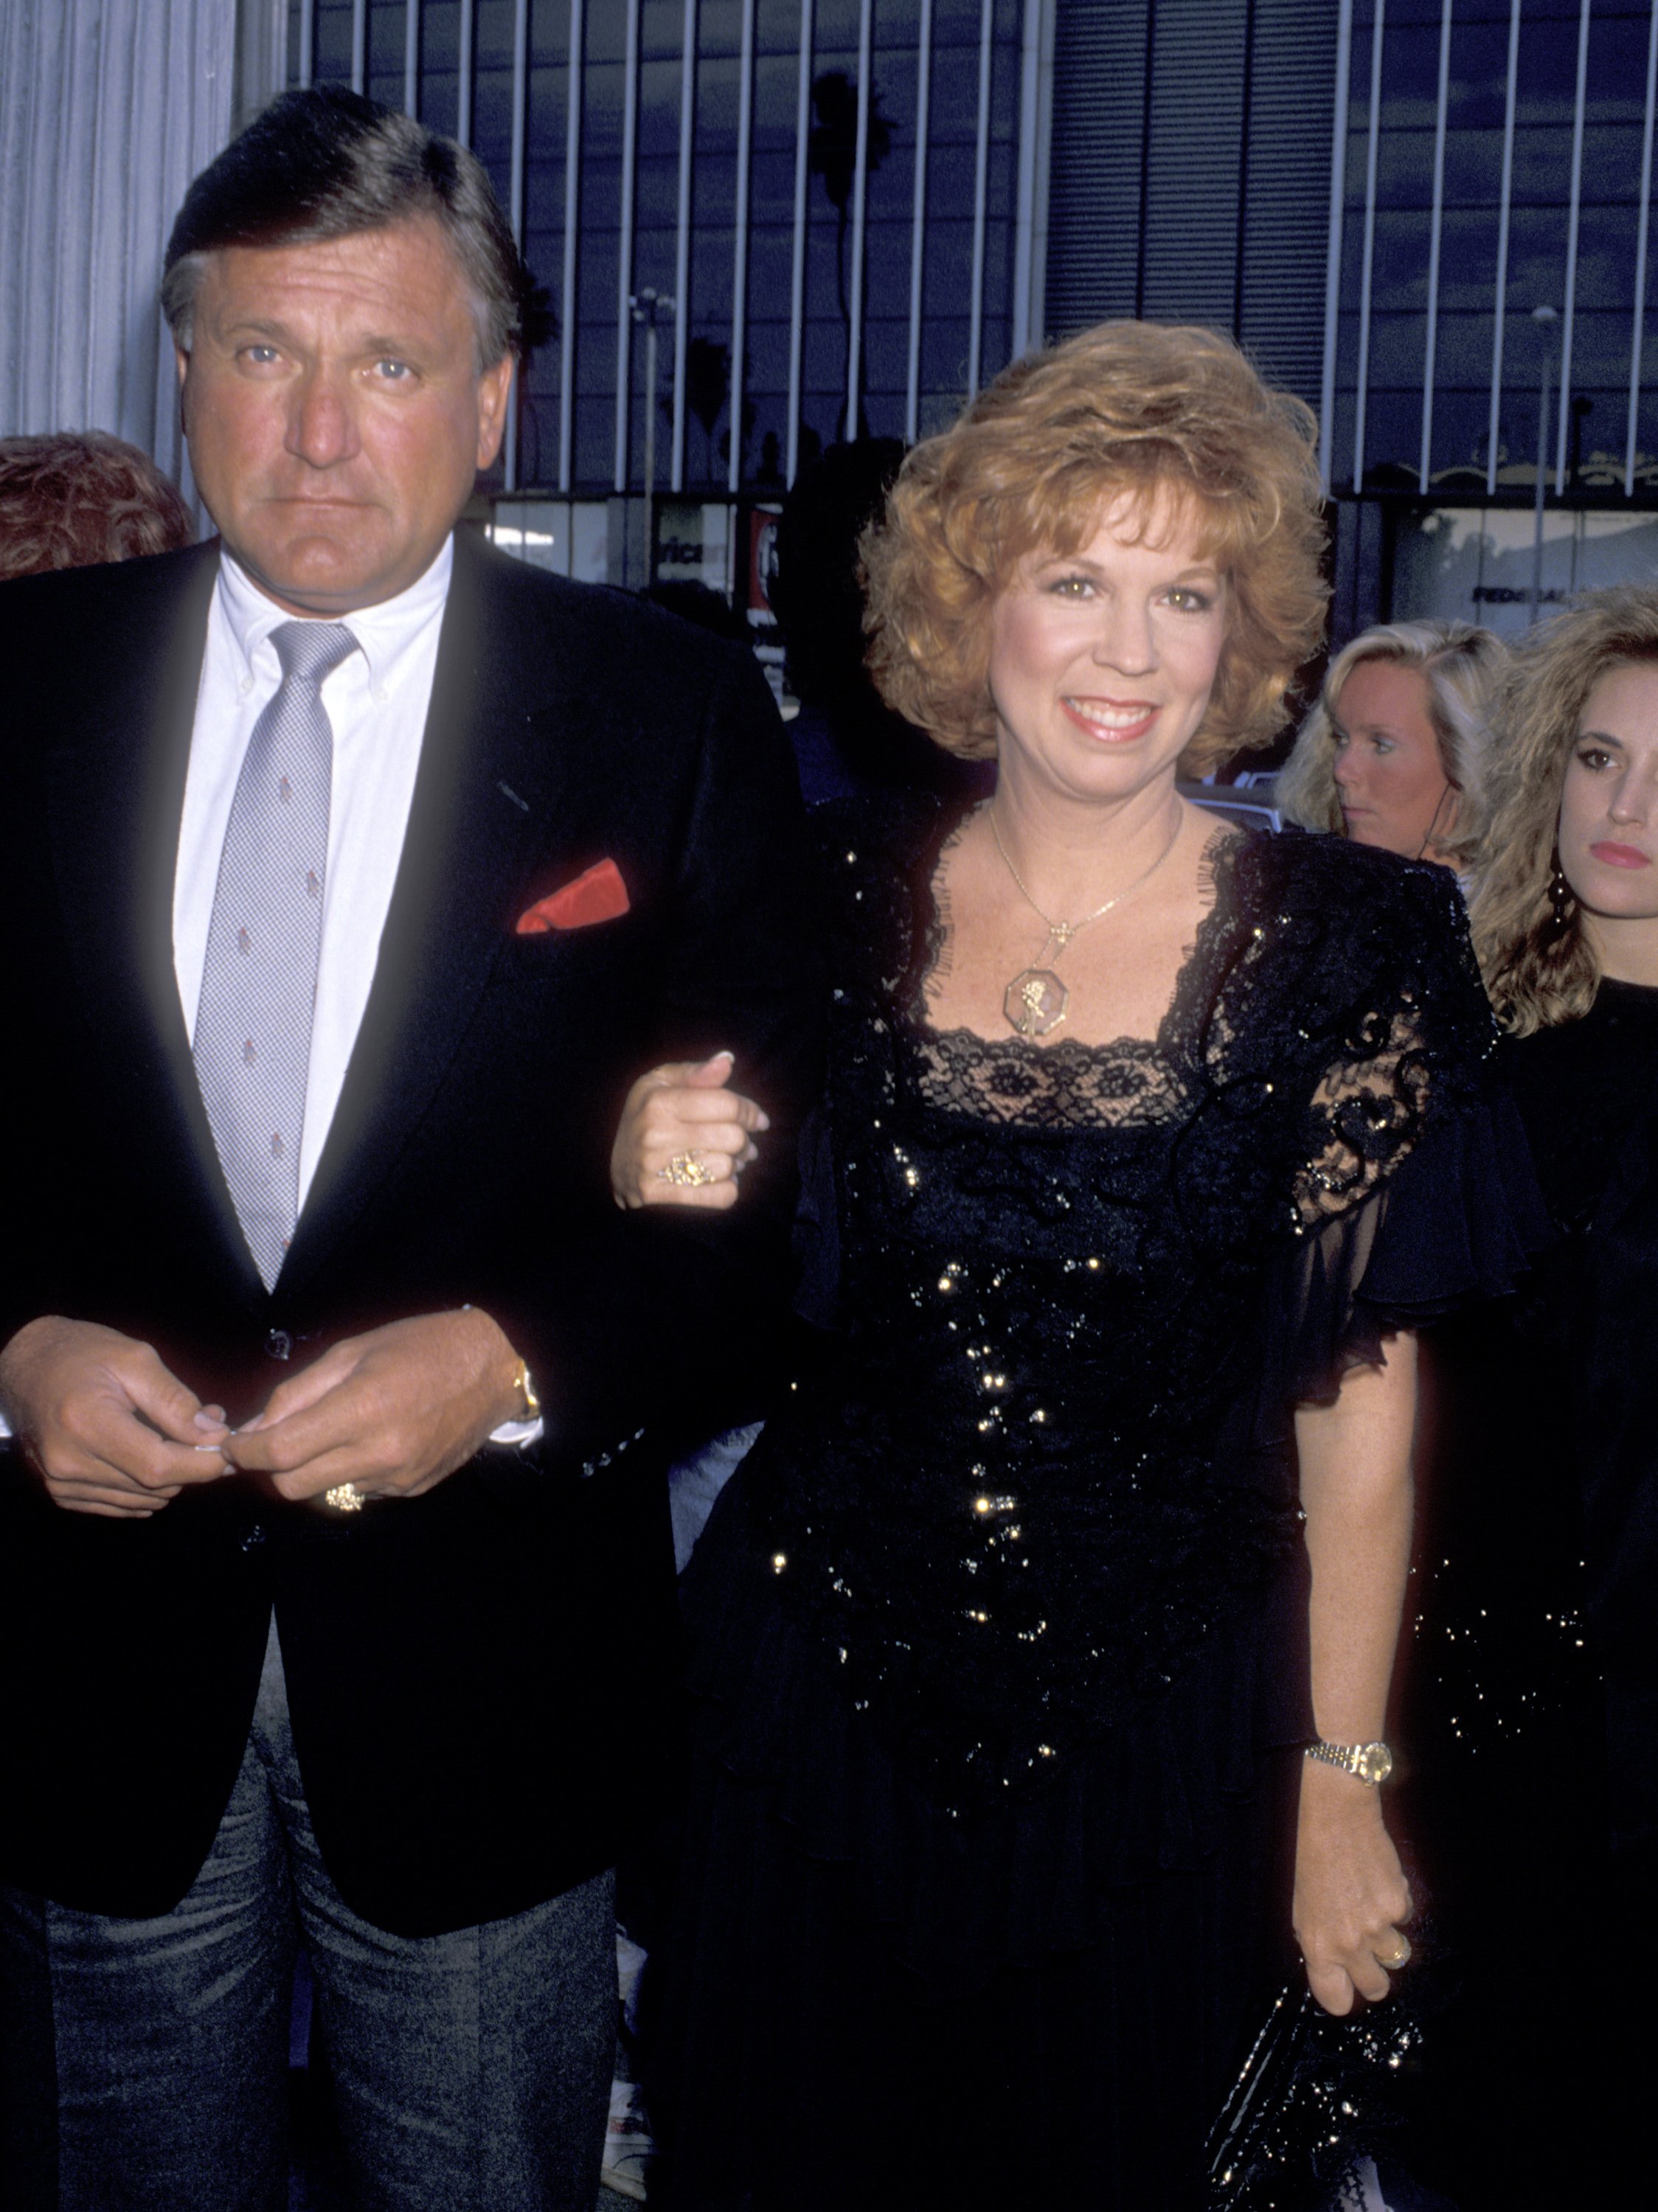 Vicki Lawrence with husband make-up artist Alvin Schultz during the Third Annual American Comedy Awards on May 23, 1989 at Hollywood Palladium in Hollywood, California. / Source: Getty Images